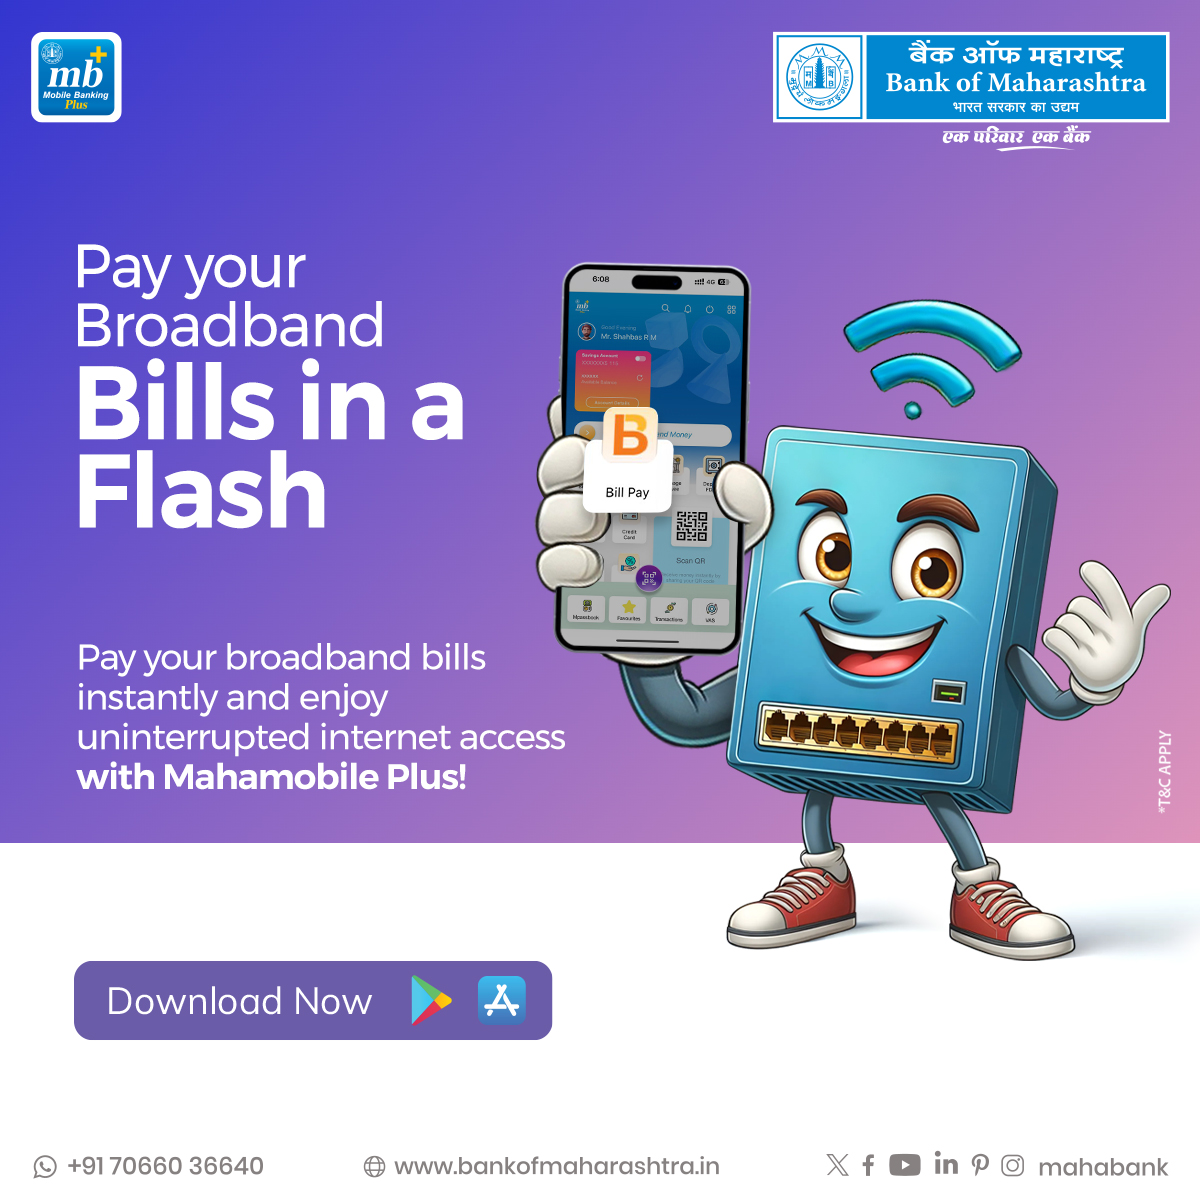 Experience the ease of managing your #broadband bills with Mahamobile Plus! Enjoy instant payments & ensure your internet never skips a beat. Dive into the convenience of #MahamobilePlus. Download now & experience hassle-free bill payments!

Download App bit.ly/41WsT4A